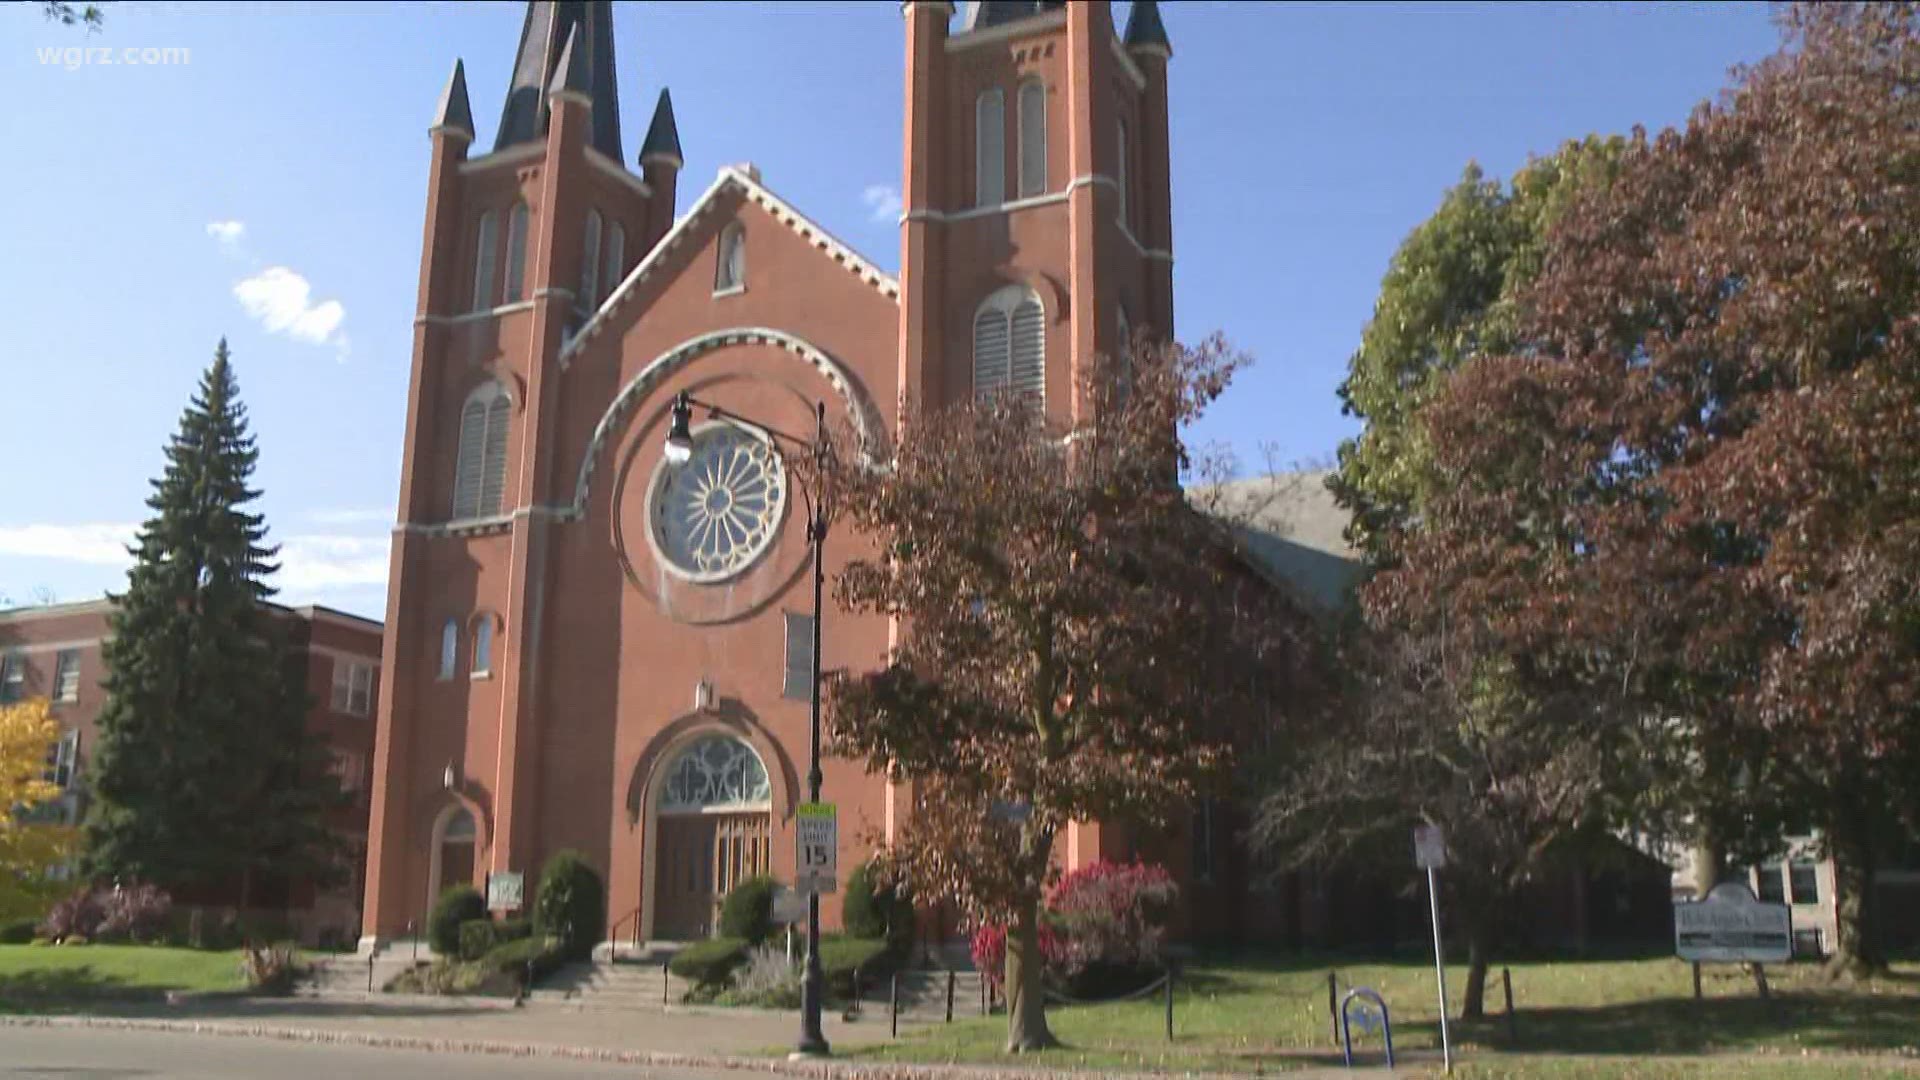 For those who cannot make it in person, Holy Angels Church will be live streaming its final mass on Facebook.